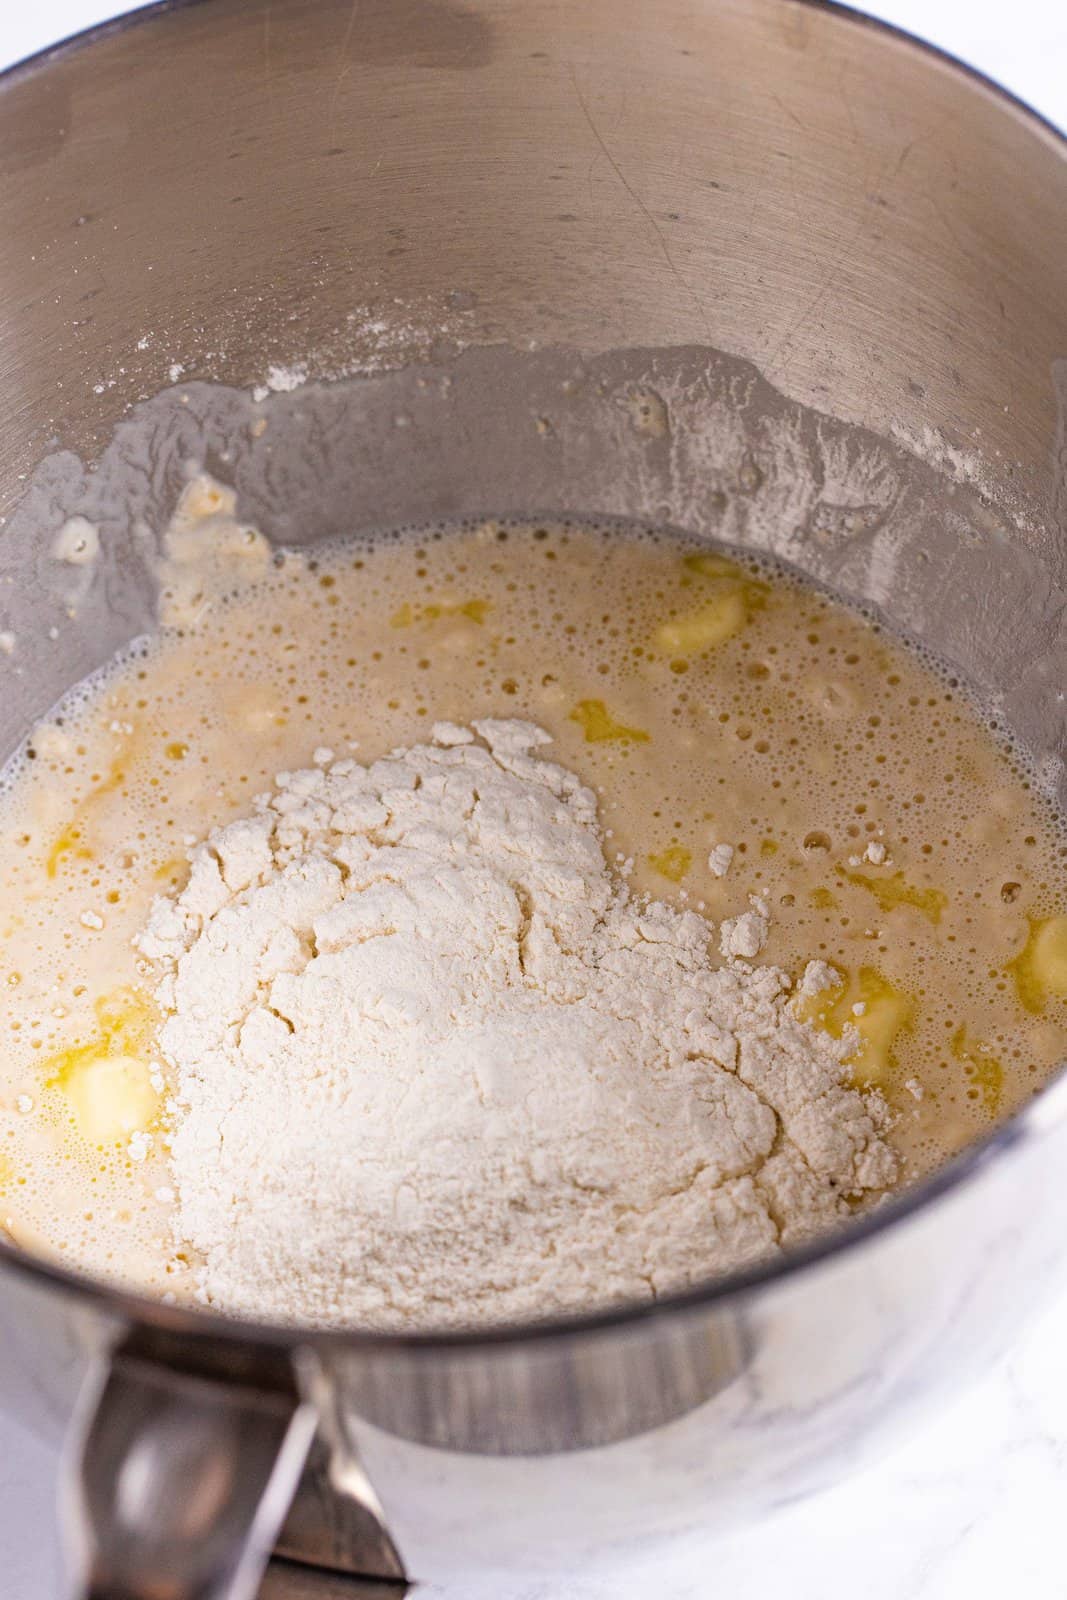 Flour being added to bowl of stand mixer.